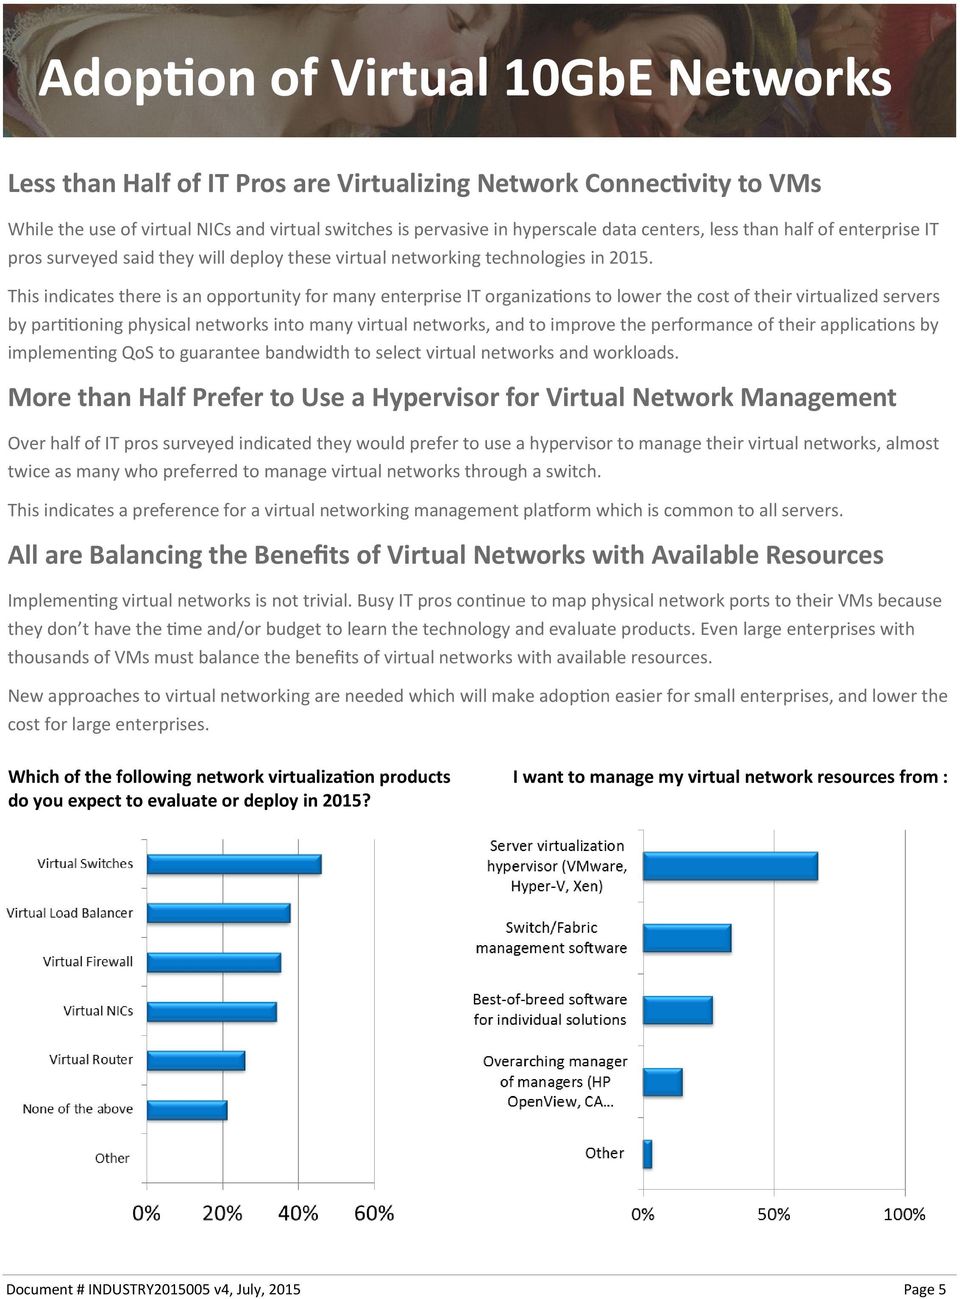 This indicates there is an opportunity for many enterprise IT organizations to lower the cost of their virtualized servers by partitioning physical networks into many virtual networks, and to improve